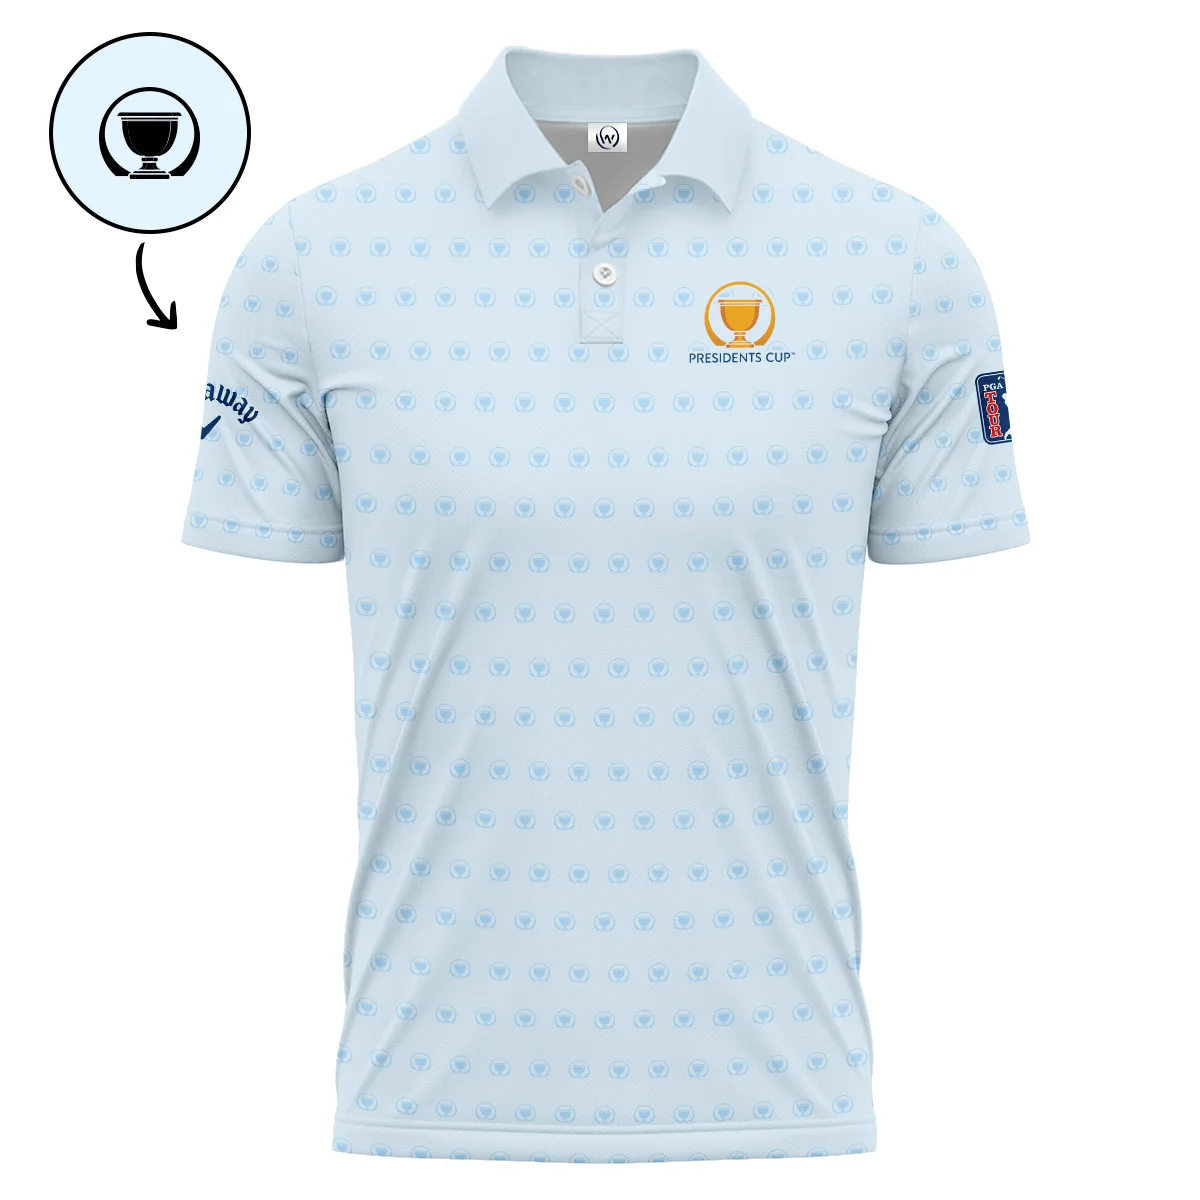 Presidents Cup Light Blue Golf Purple Patern Background Callaway Zipper Polo Shirt Style Classic